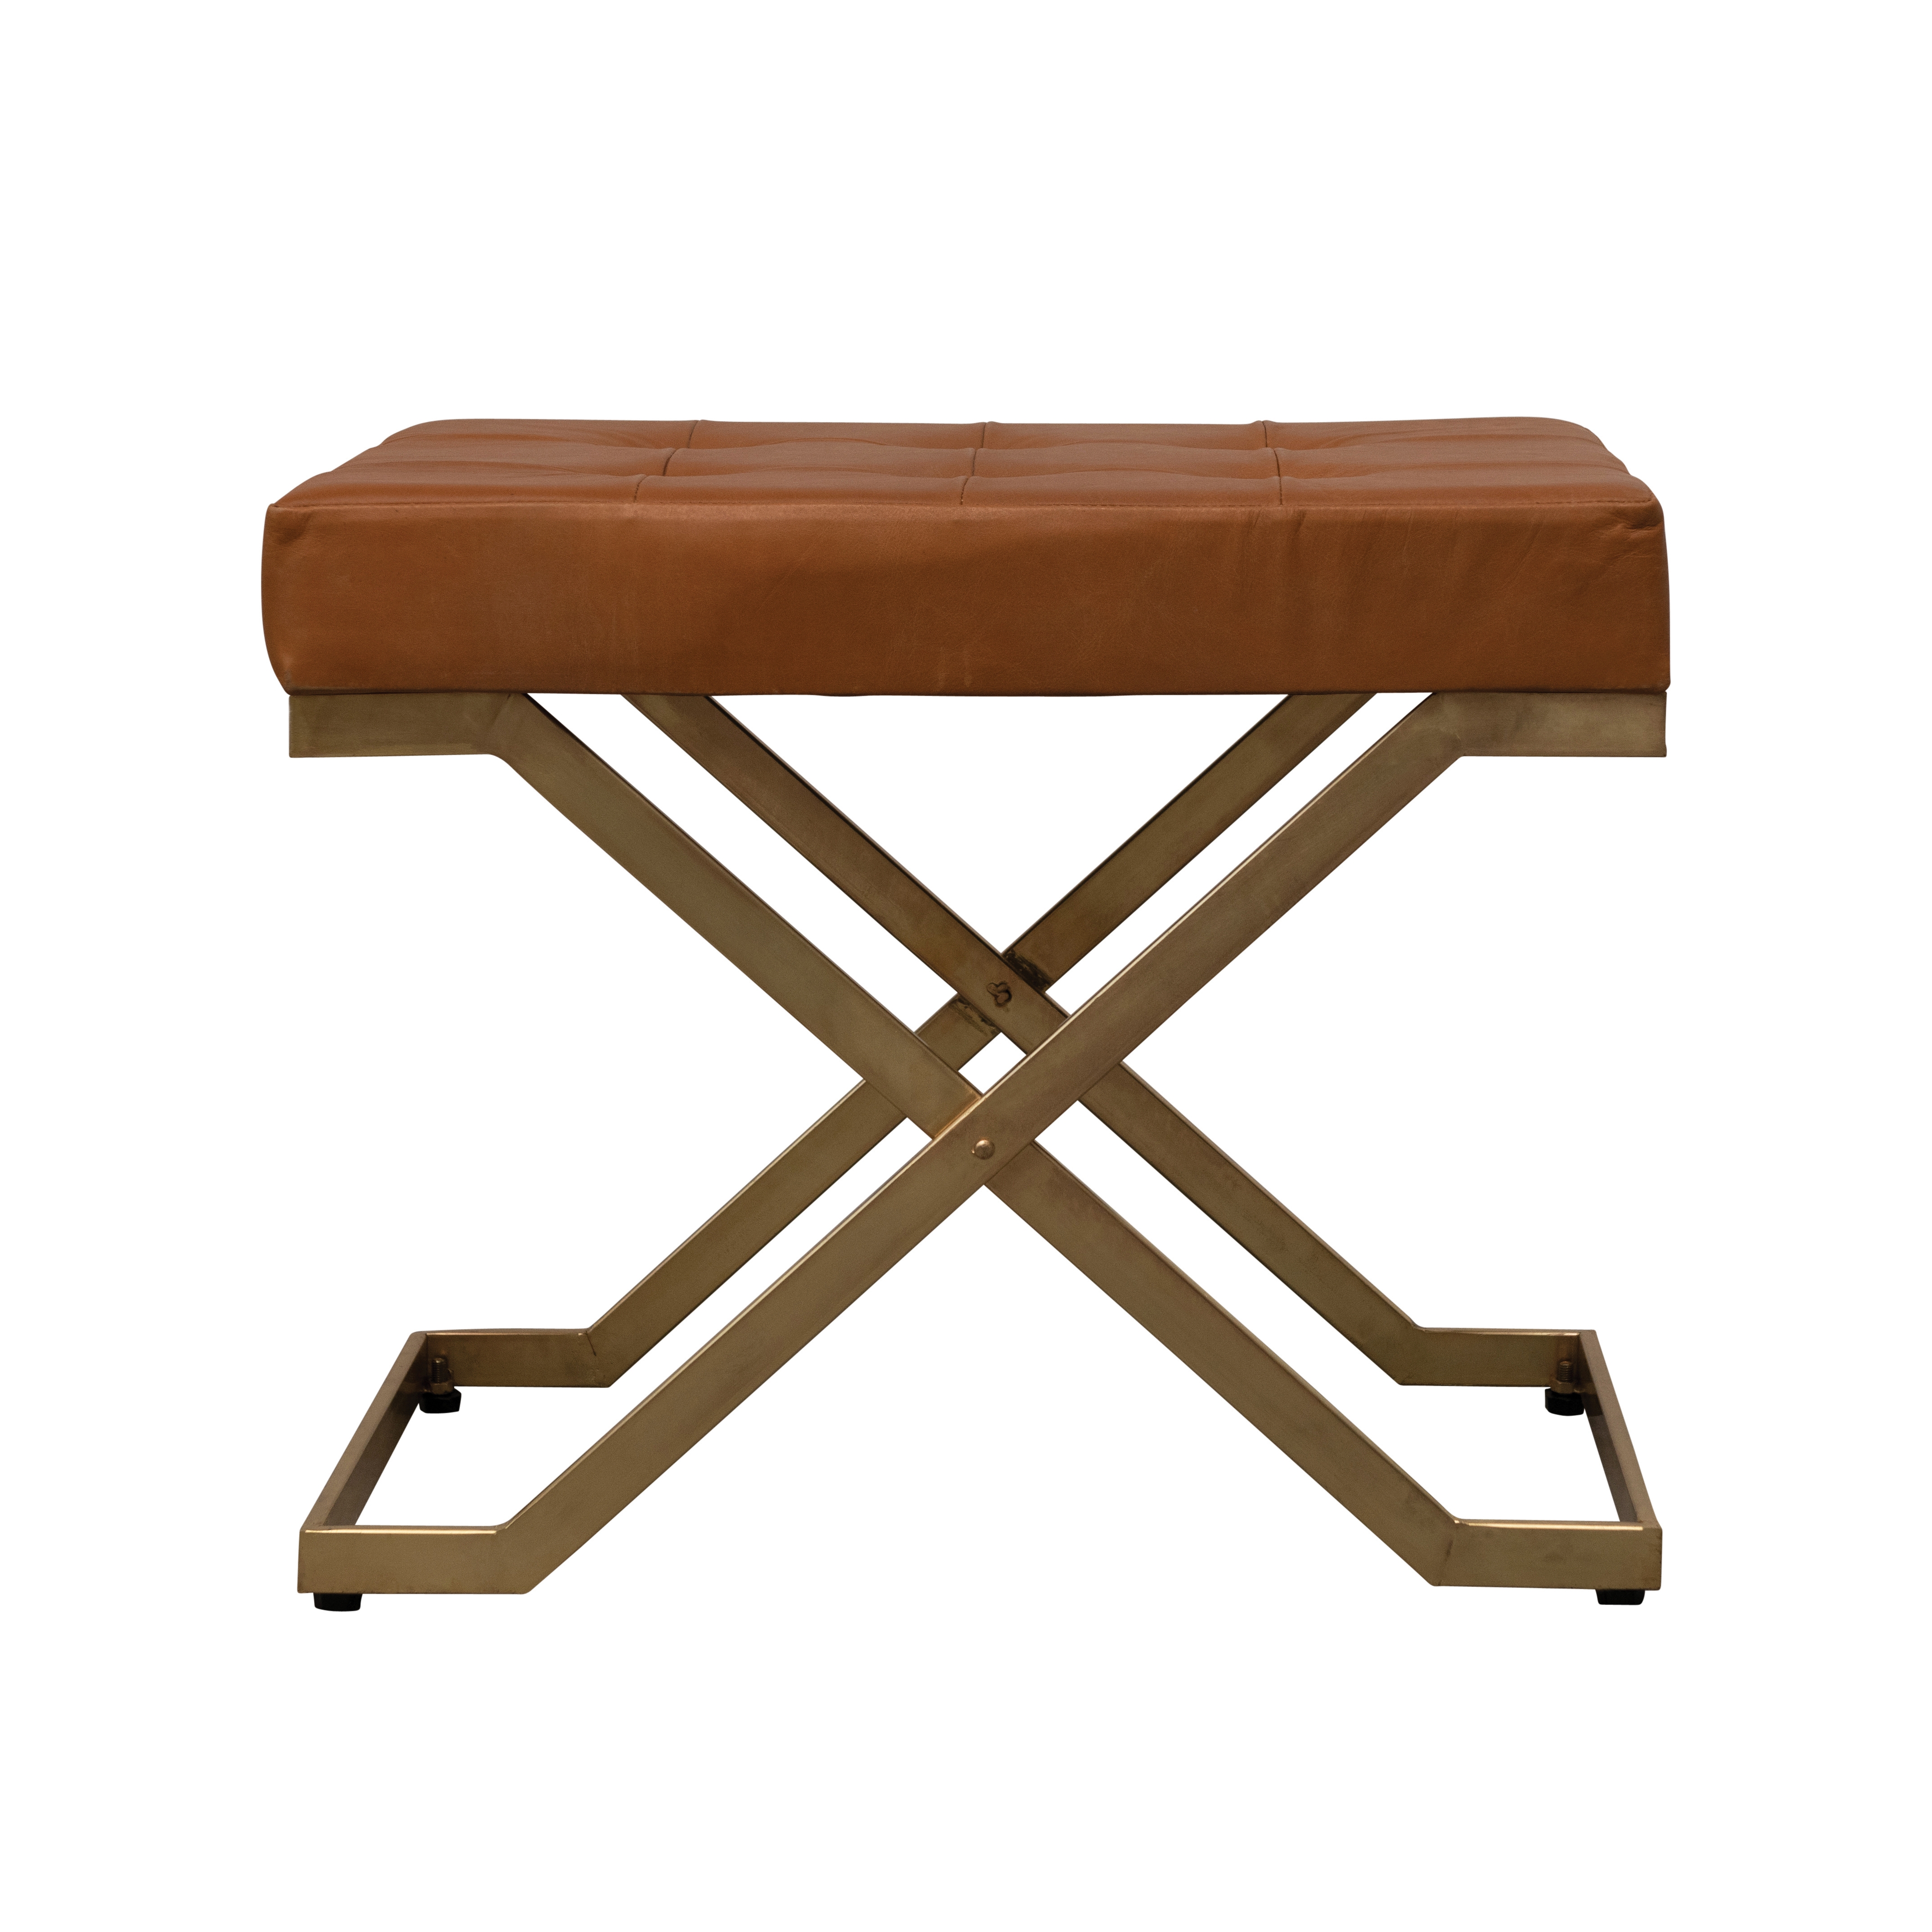 Tufted Leather Stool with Metal Legs - Image 0